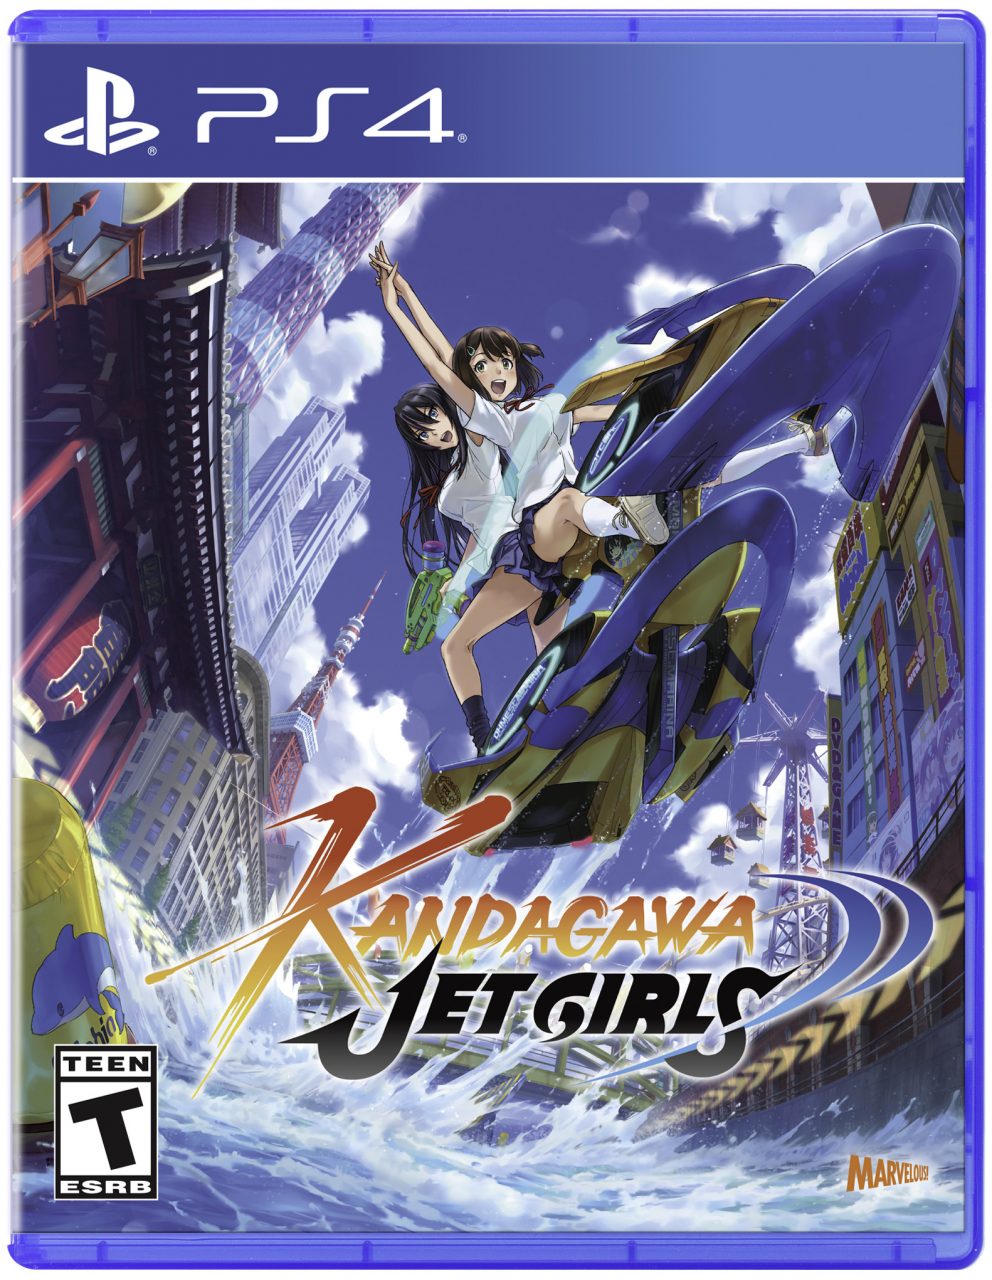 Kandagawa Jet Girls PlayStation 4 Collector cover (XSEED Games/Marvelous)